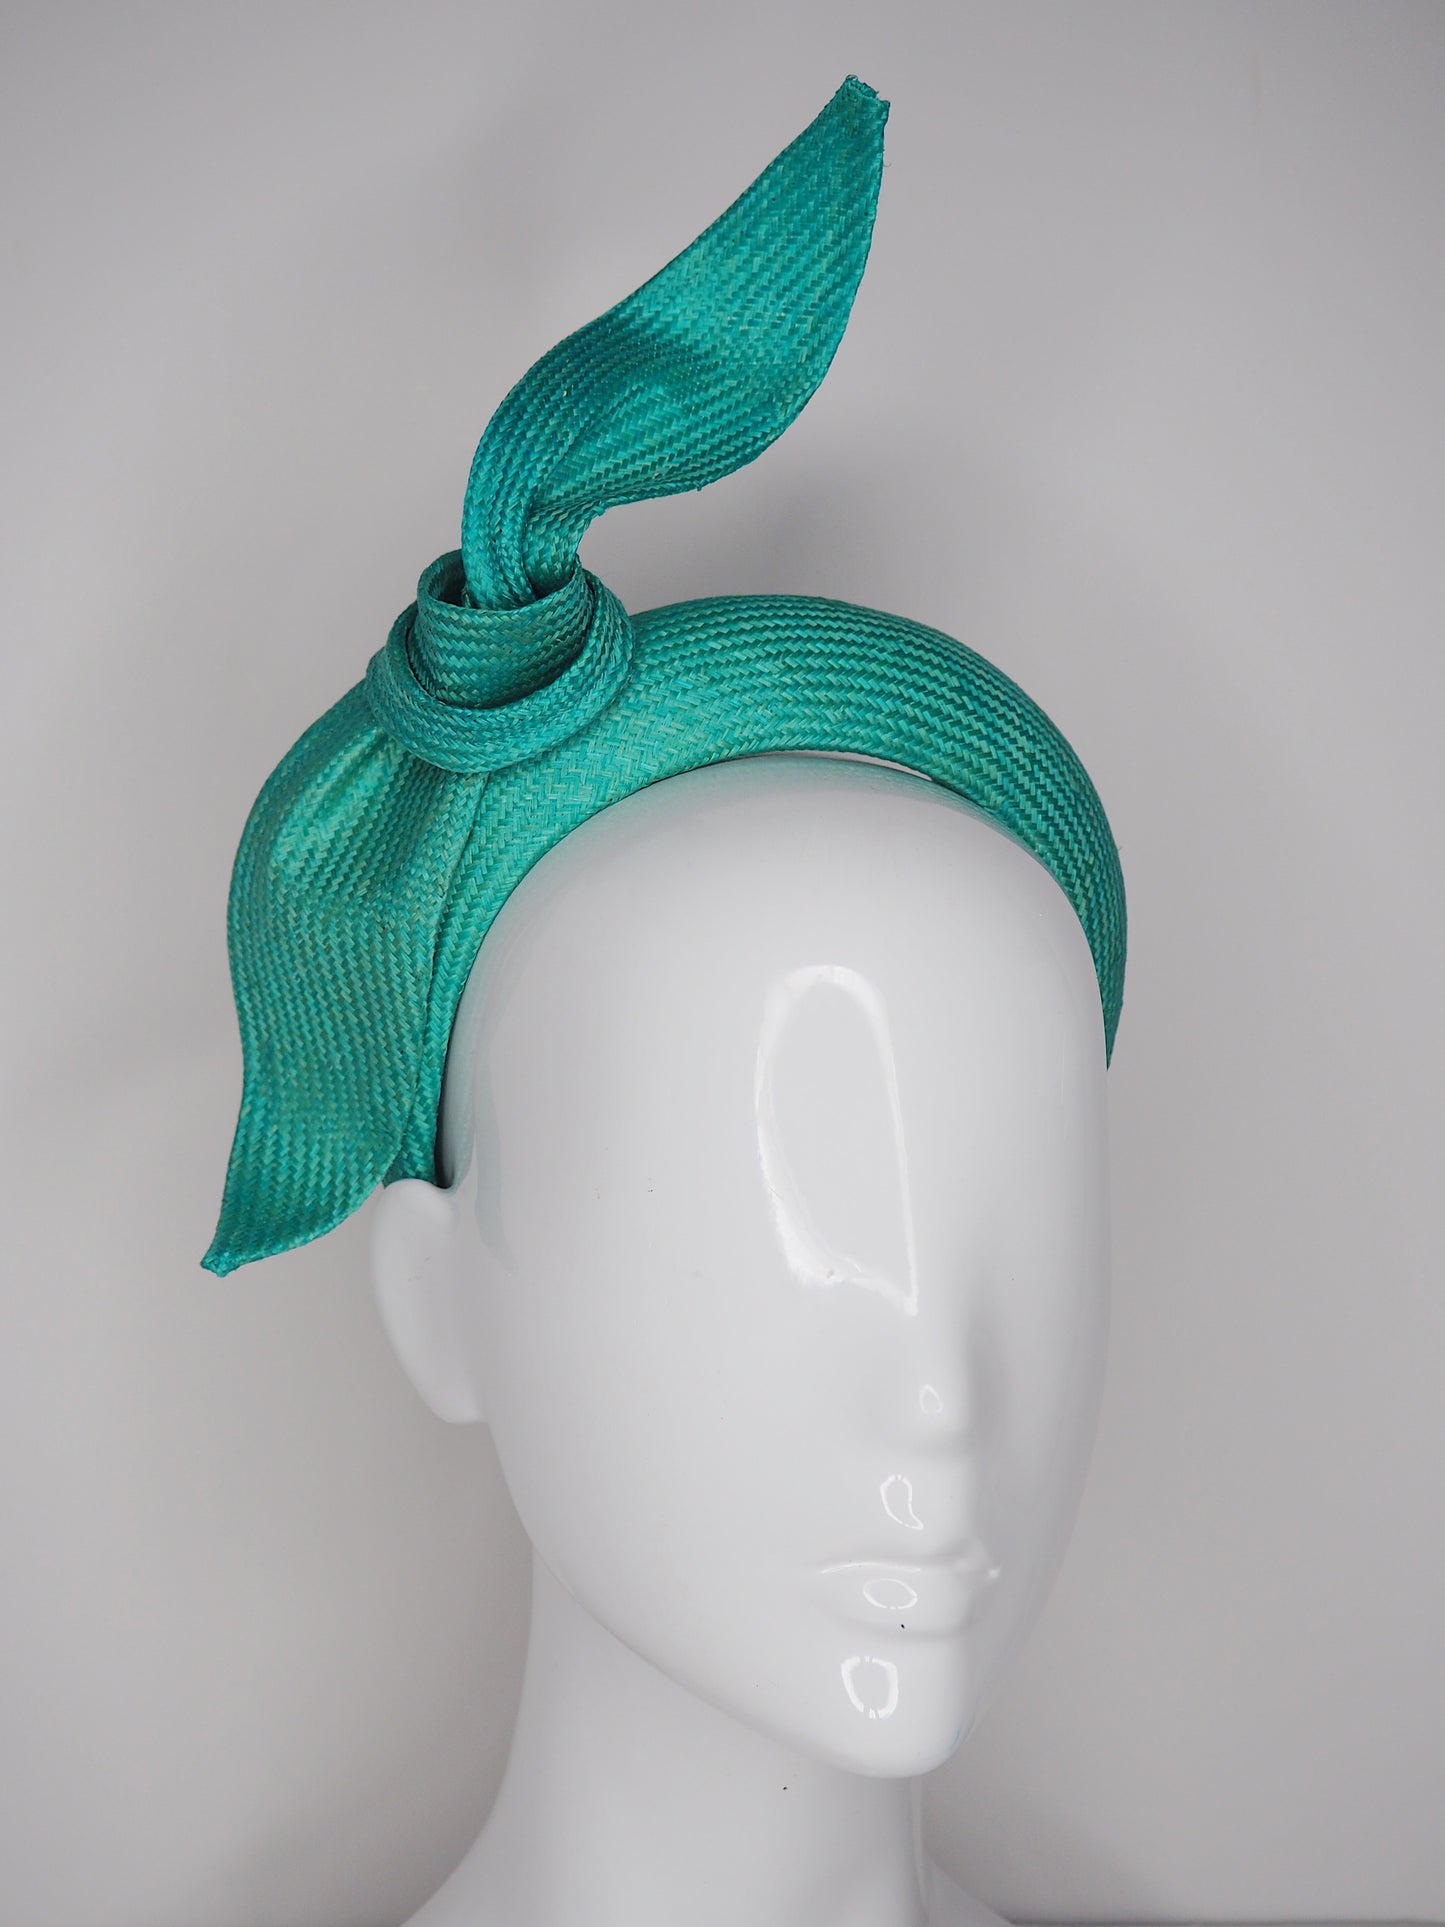 Tied in a Knot- Jade green 3d blocked headband with a simple straw knot